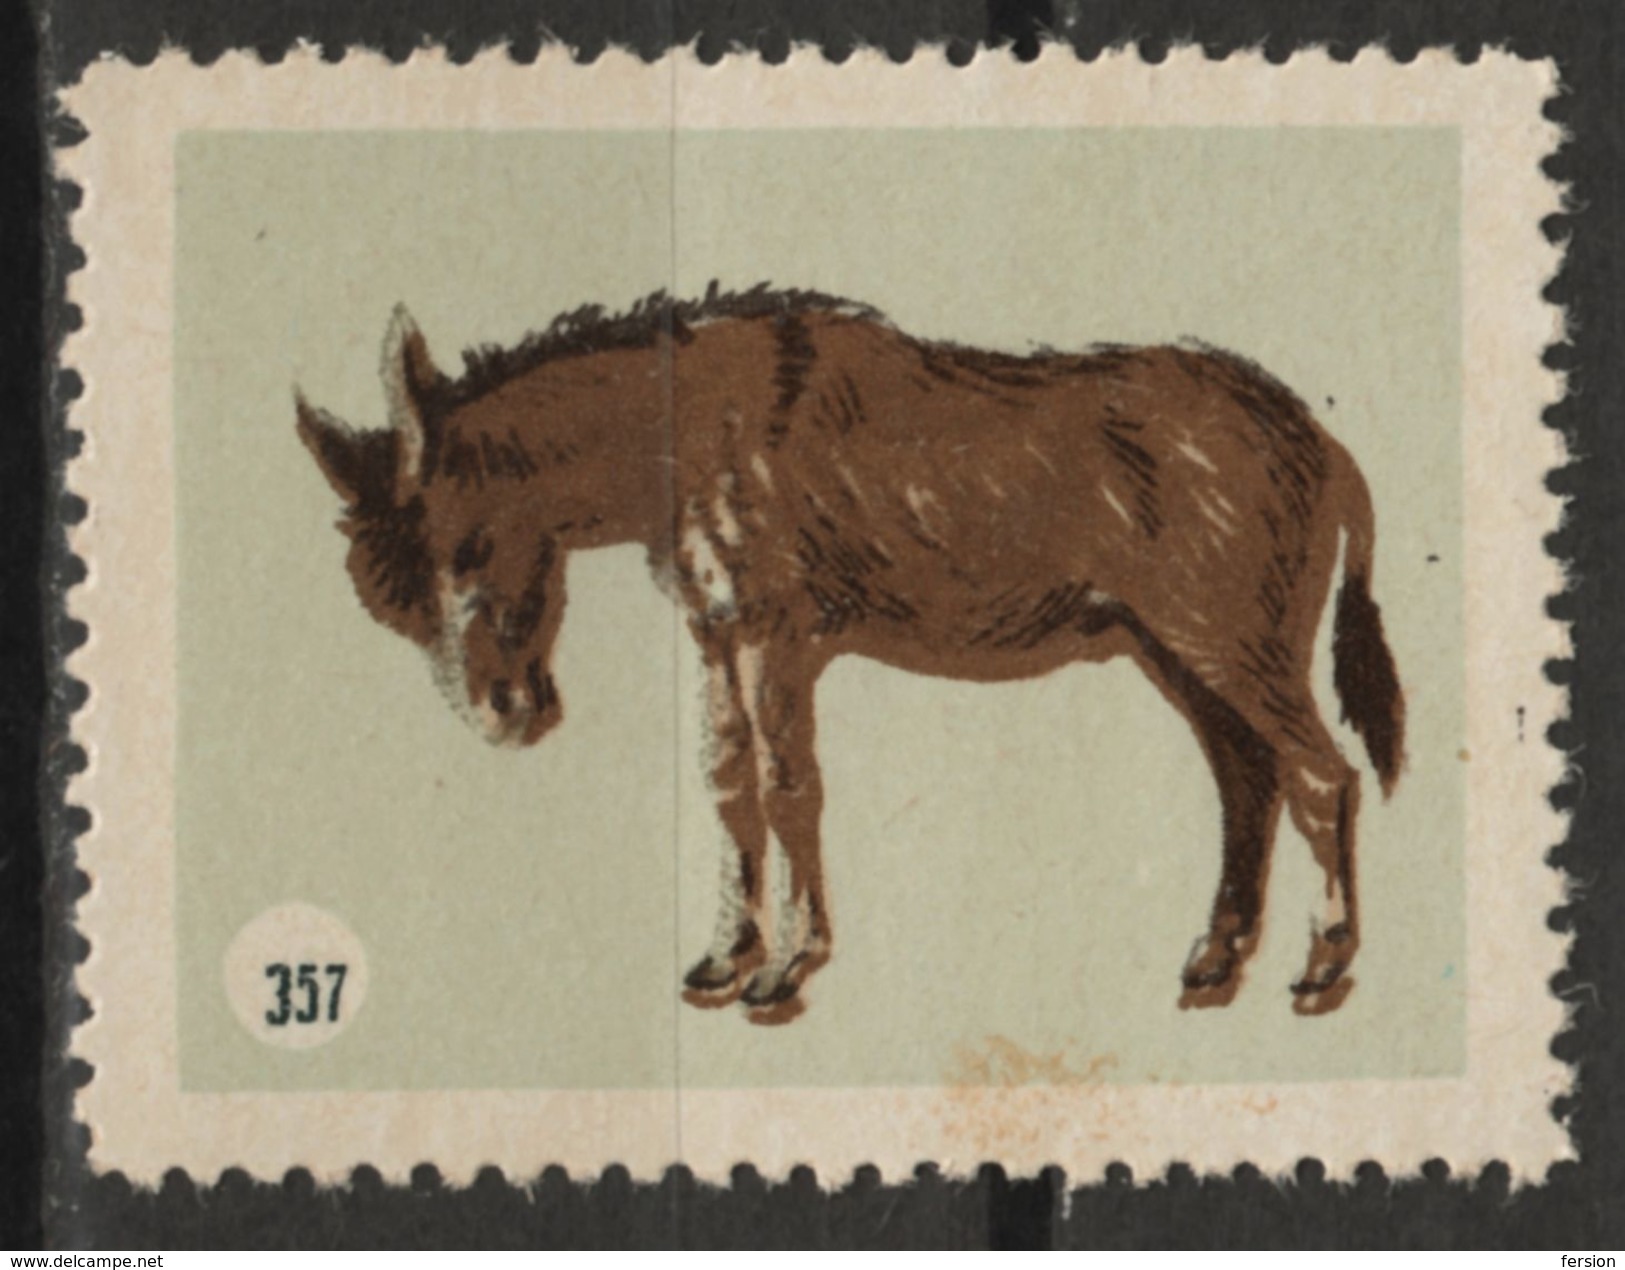 Donkey Ass - Animal - 1950's Hungary - LABEL / CINDERELLA / VIGNETTE - MH - Burros Y Asnos